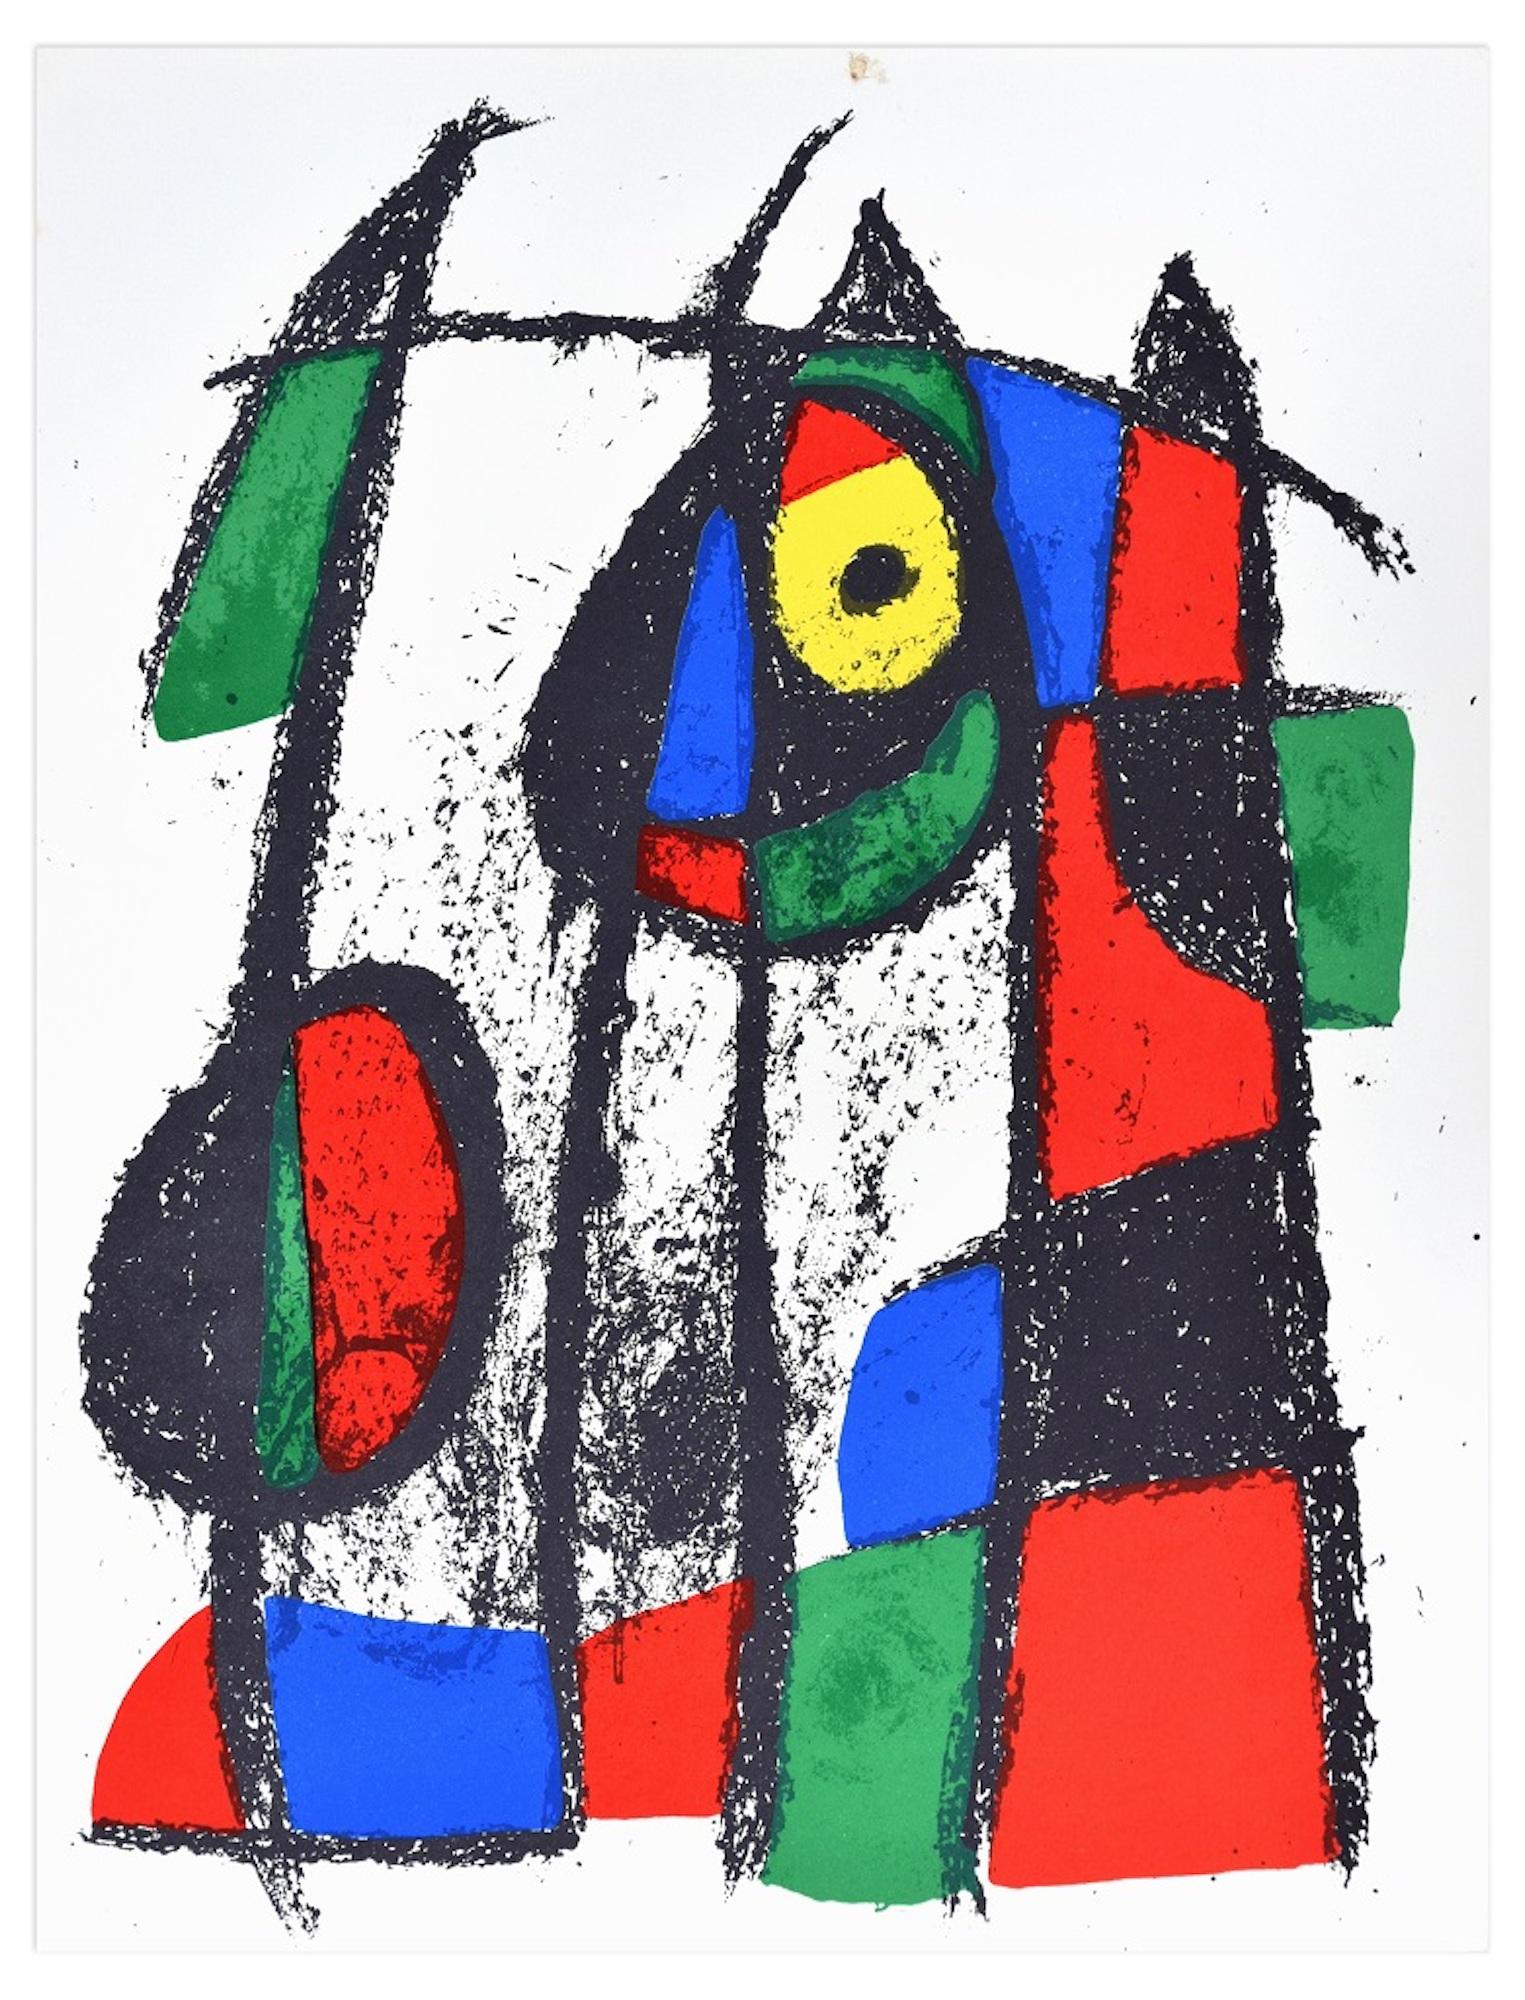 (after) Joan Miró Abstract Print - Composition VII - Original Lithograph by Joan Mirò - 1974